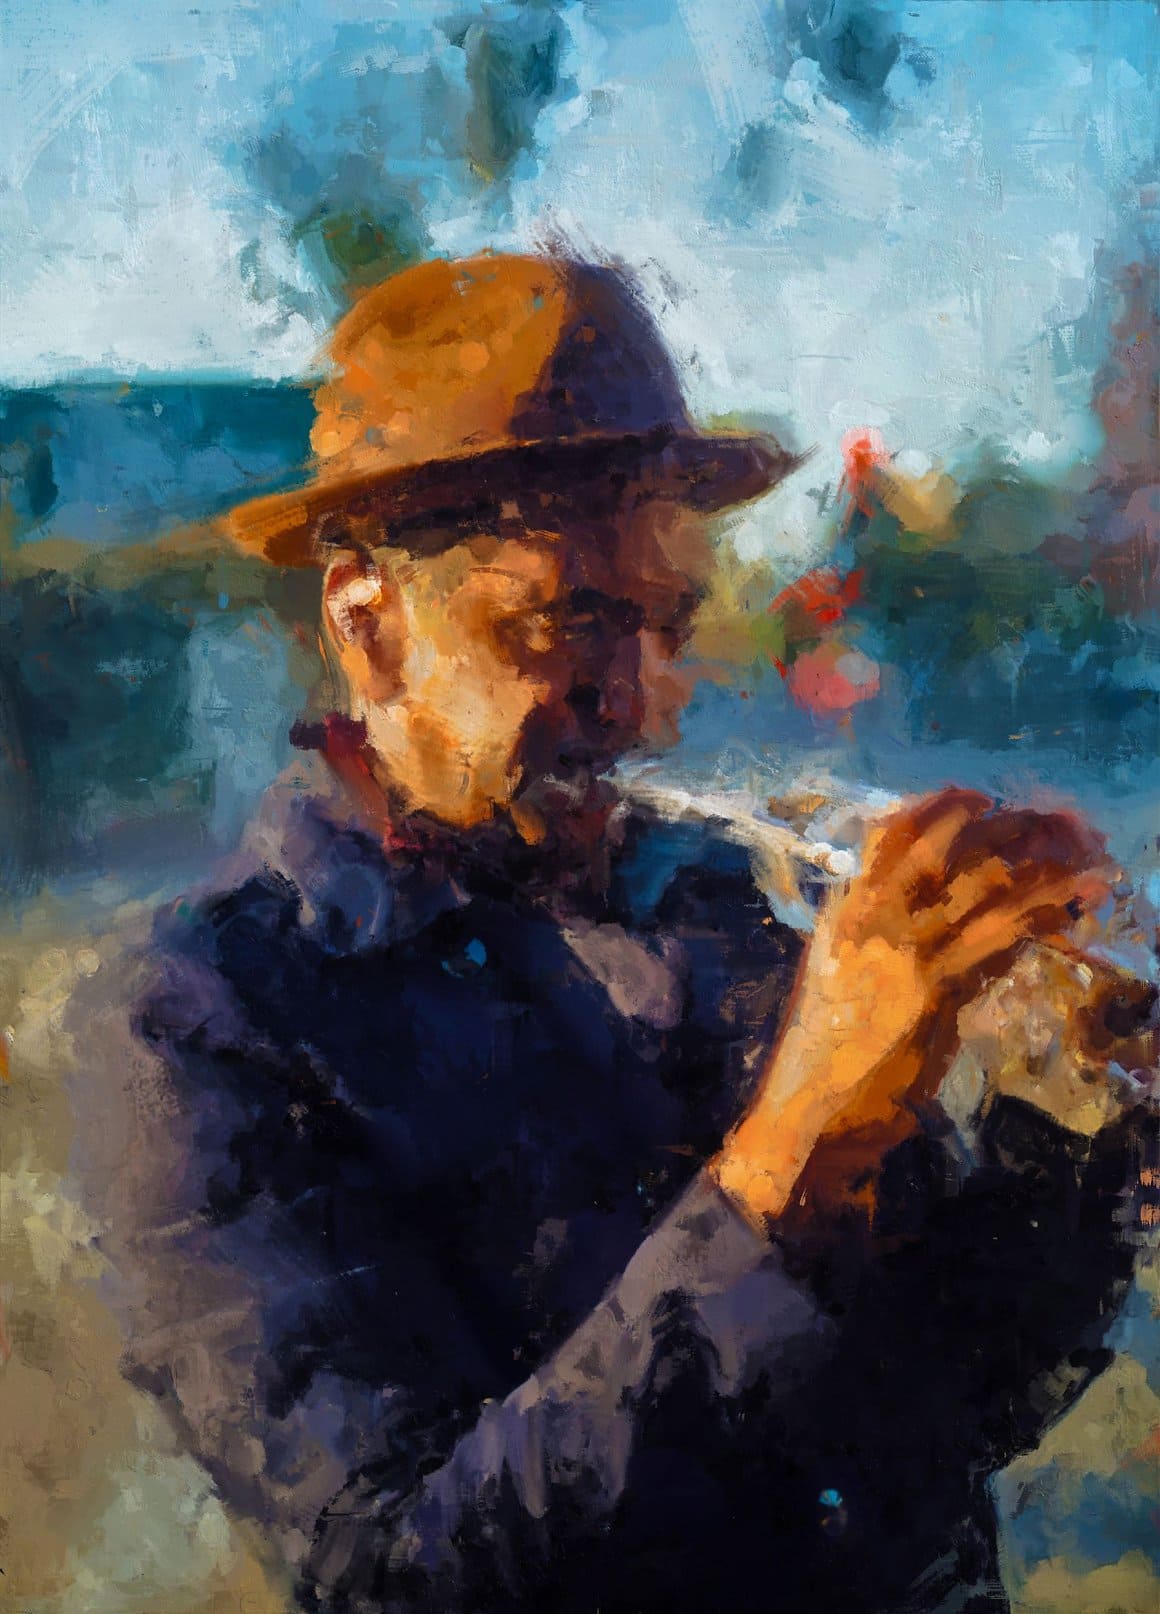 Image of a man playing a musical instrument with a painted photoshop effect.